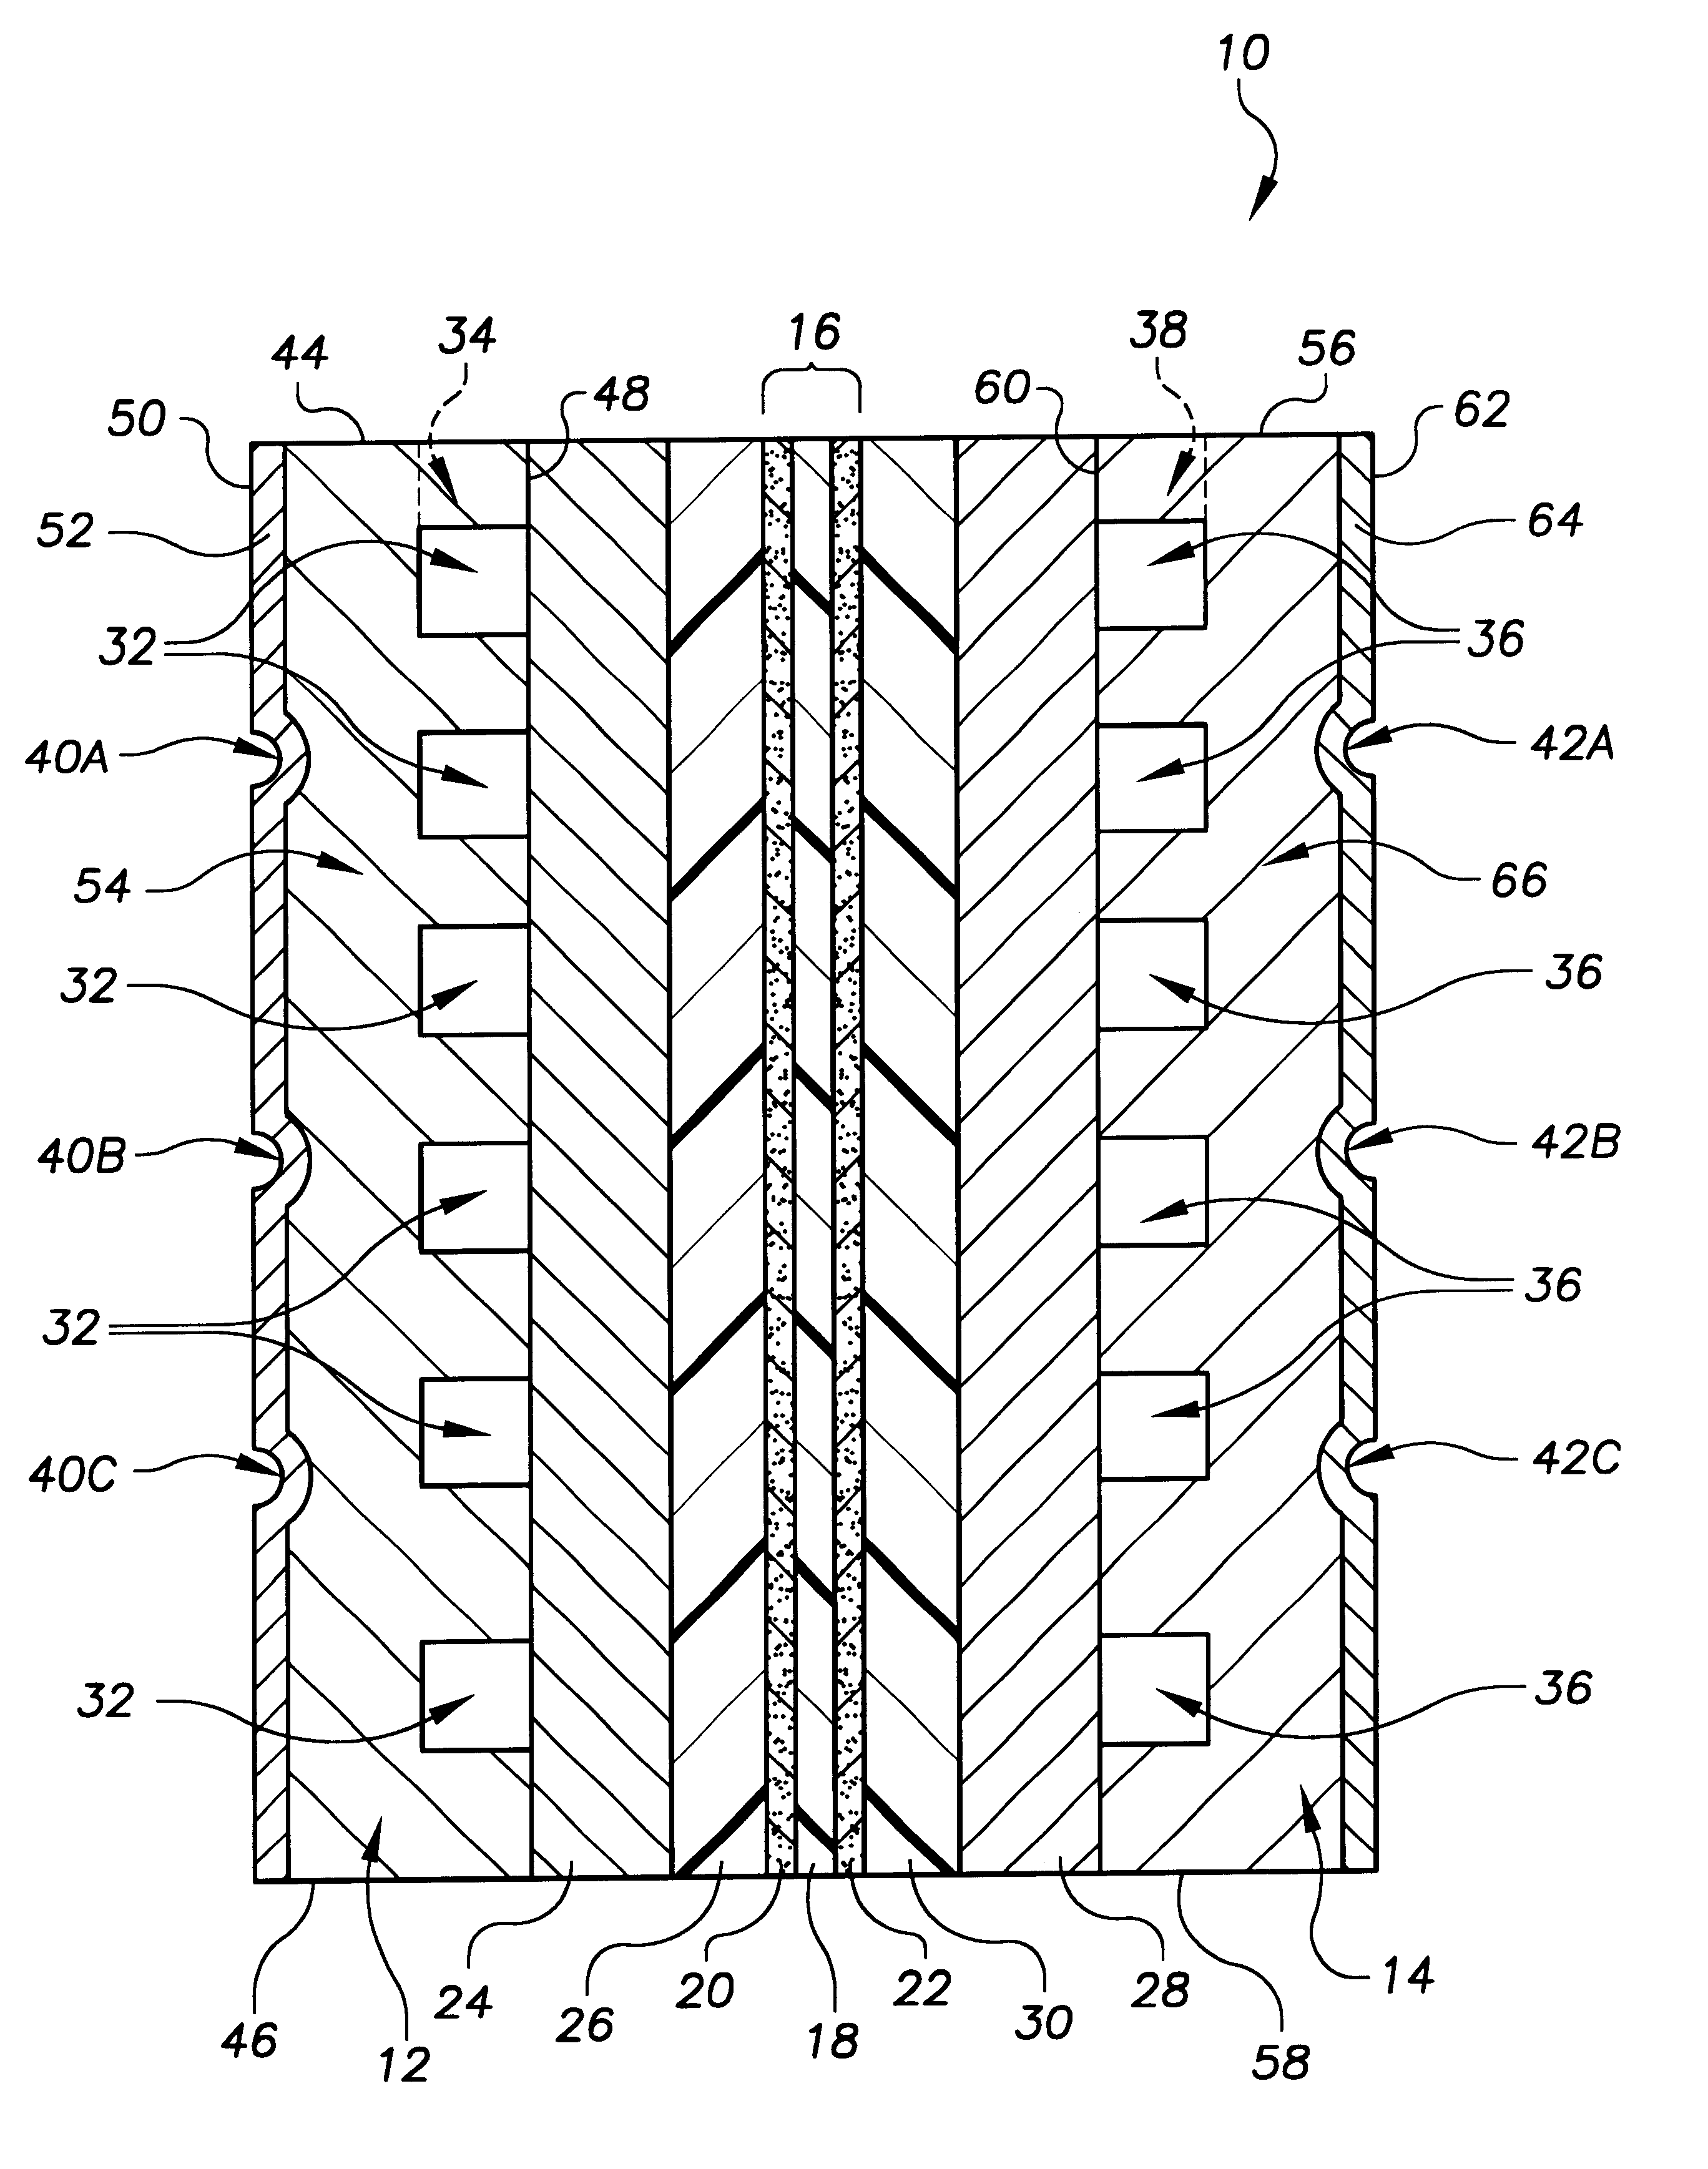 Bi-zone water transport plate for a fuel cell